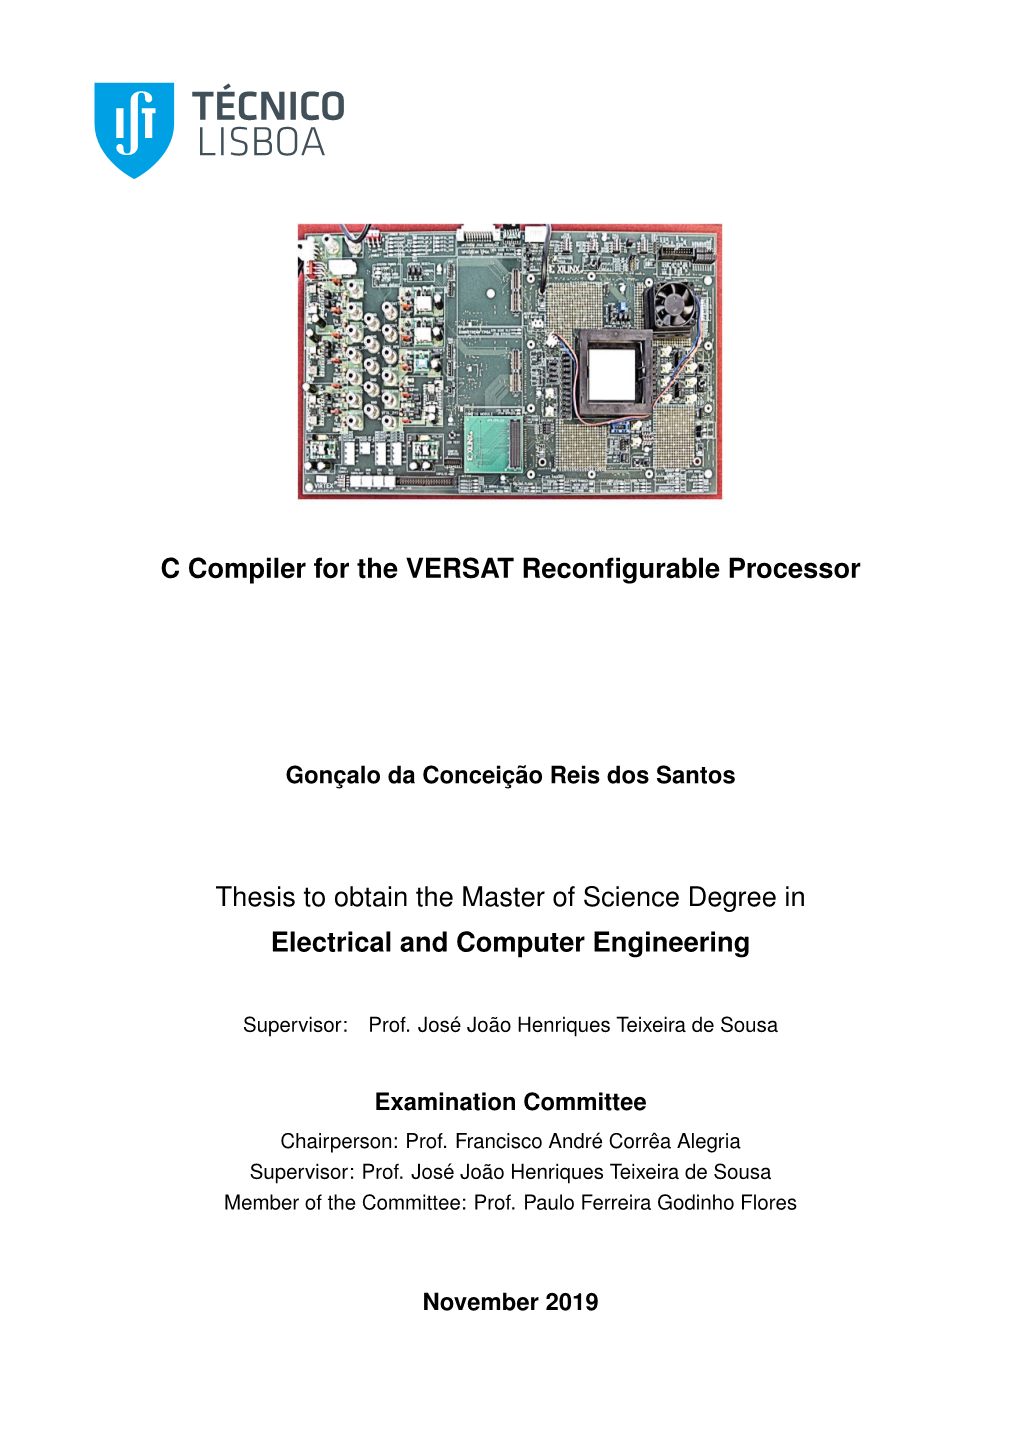 C Compiler for the VERSAT Reconfigurable Processor Thesis To